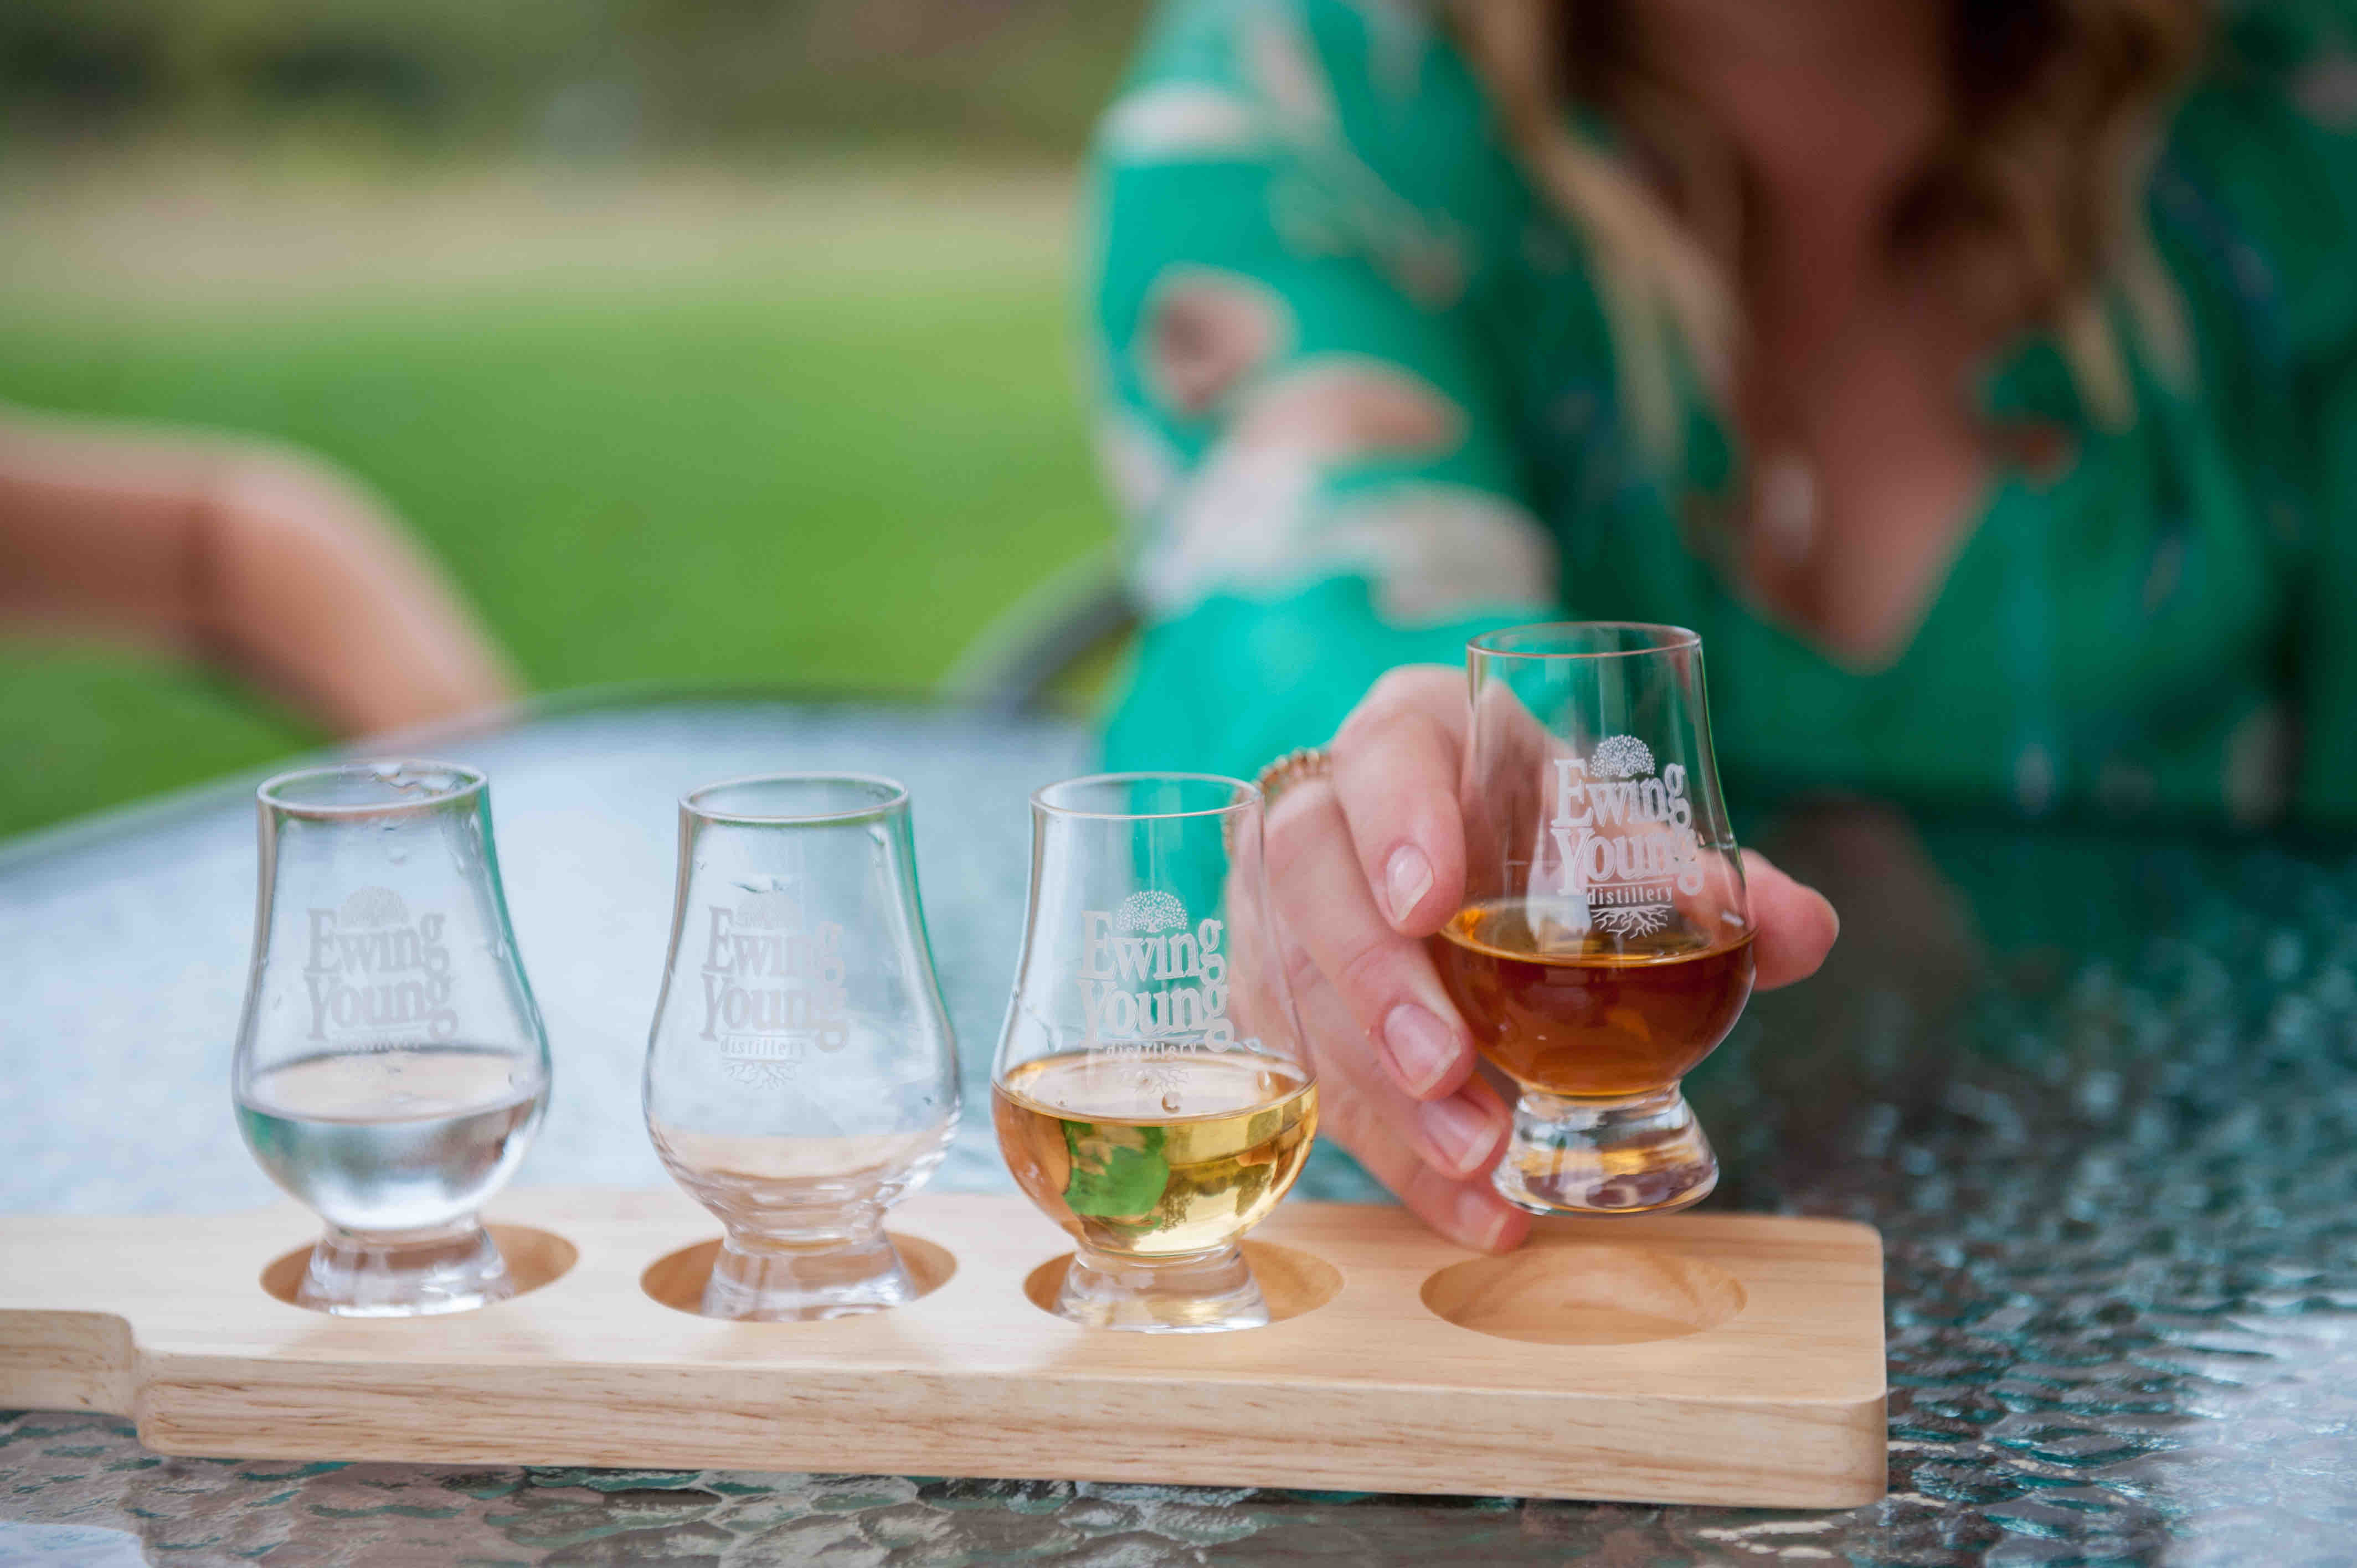 A flight at Ewing Young Distillery in Newberg, Oregon.(image courtesy of photographer Erica Davis)